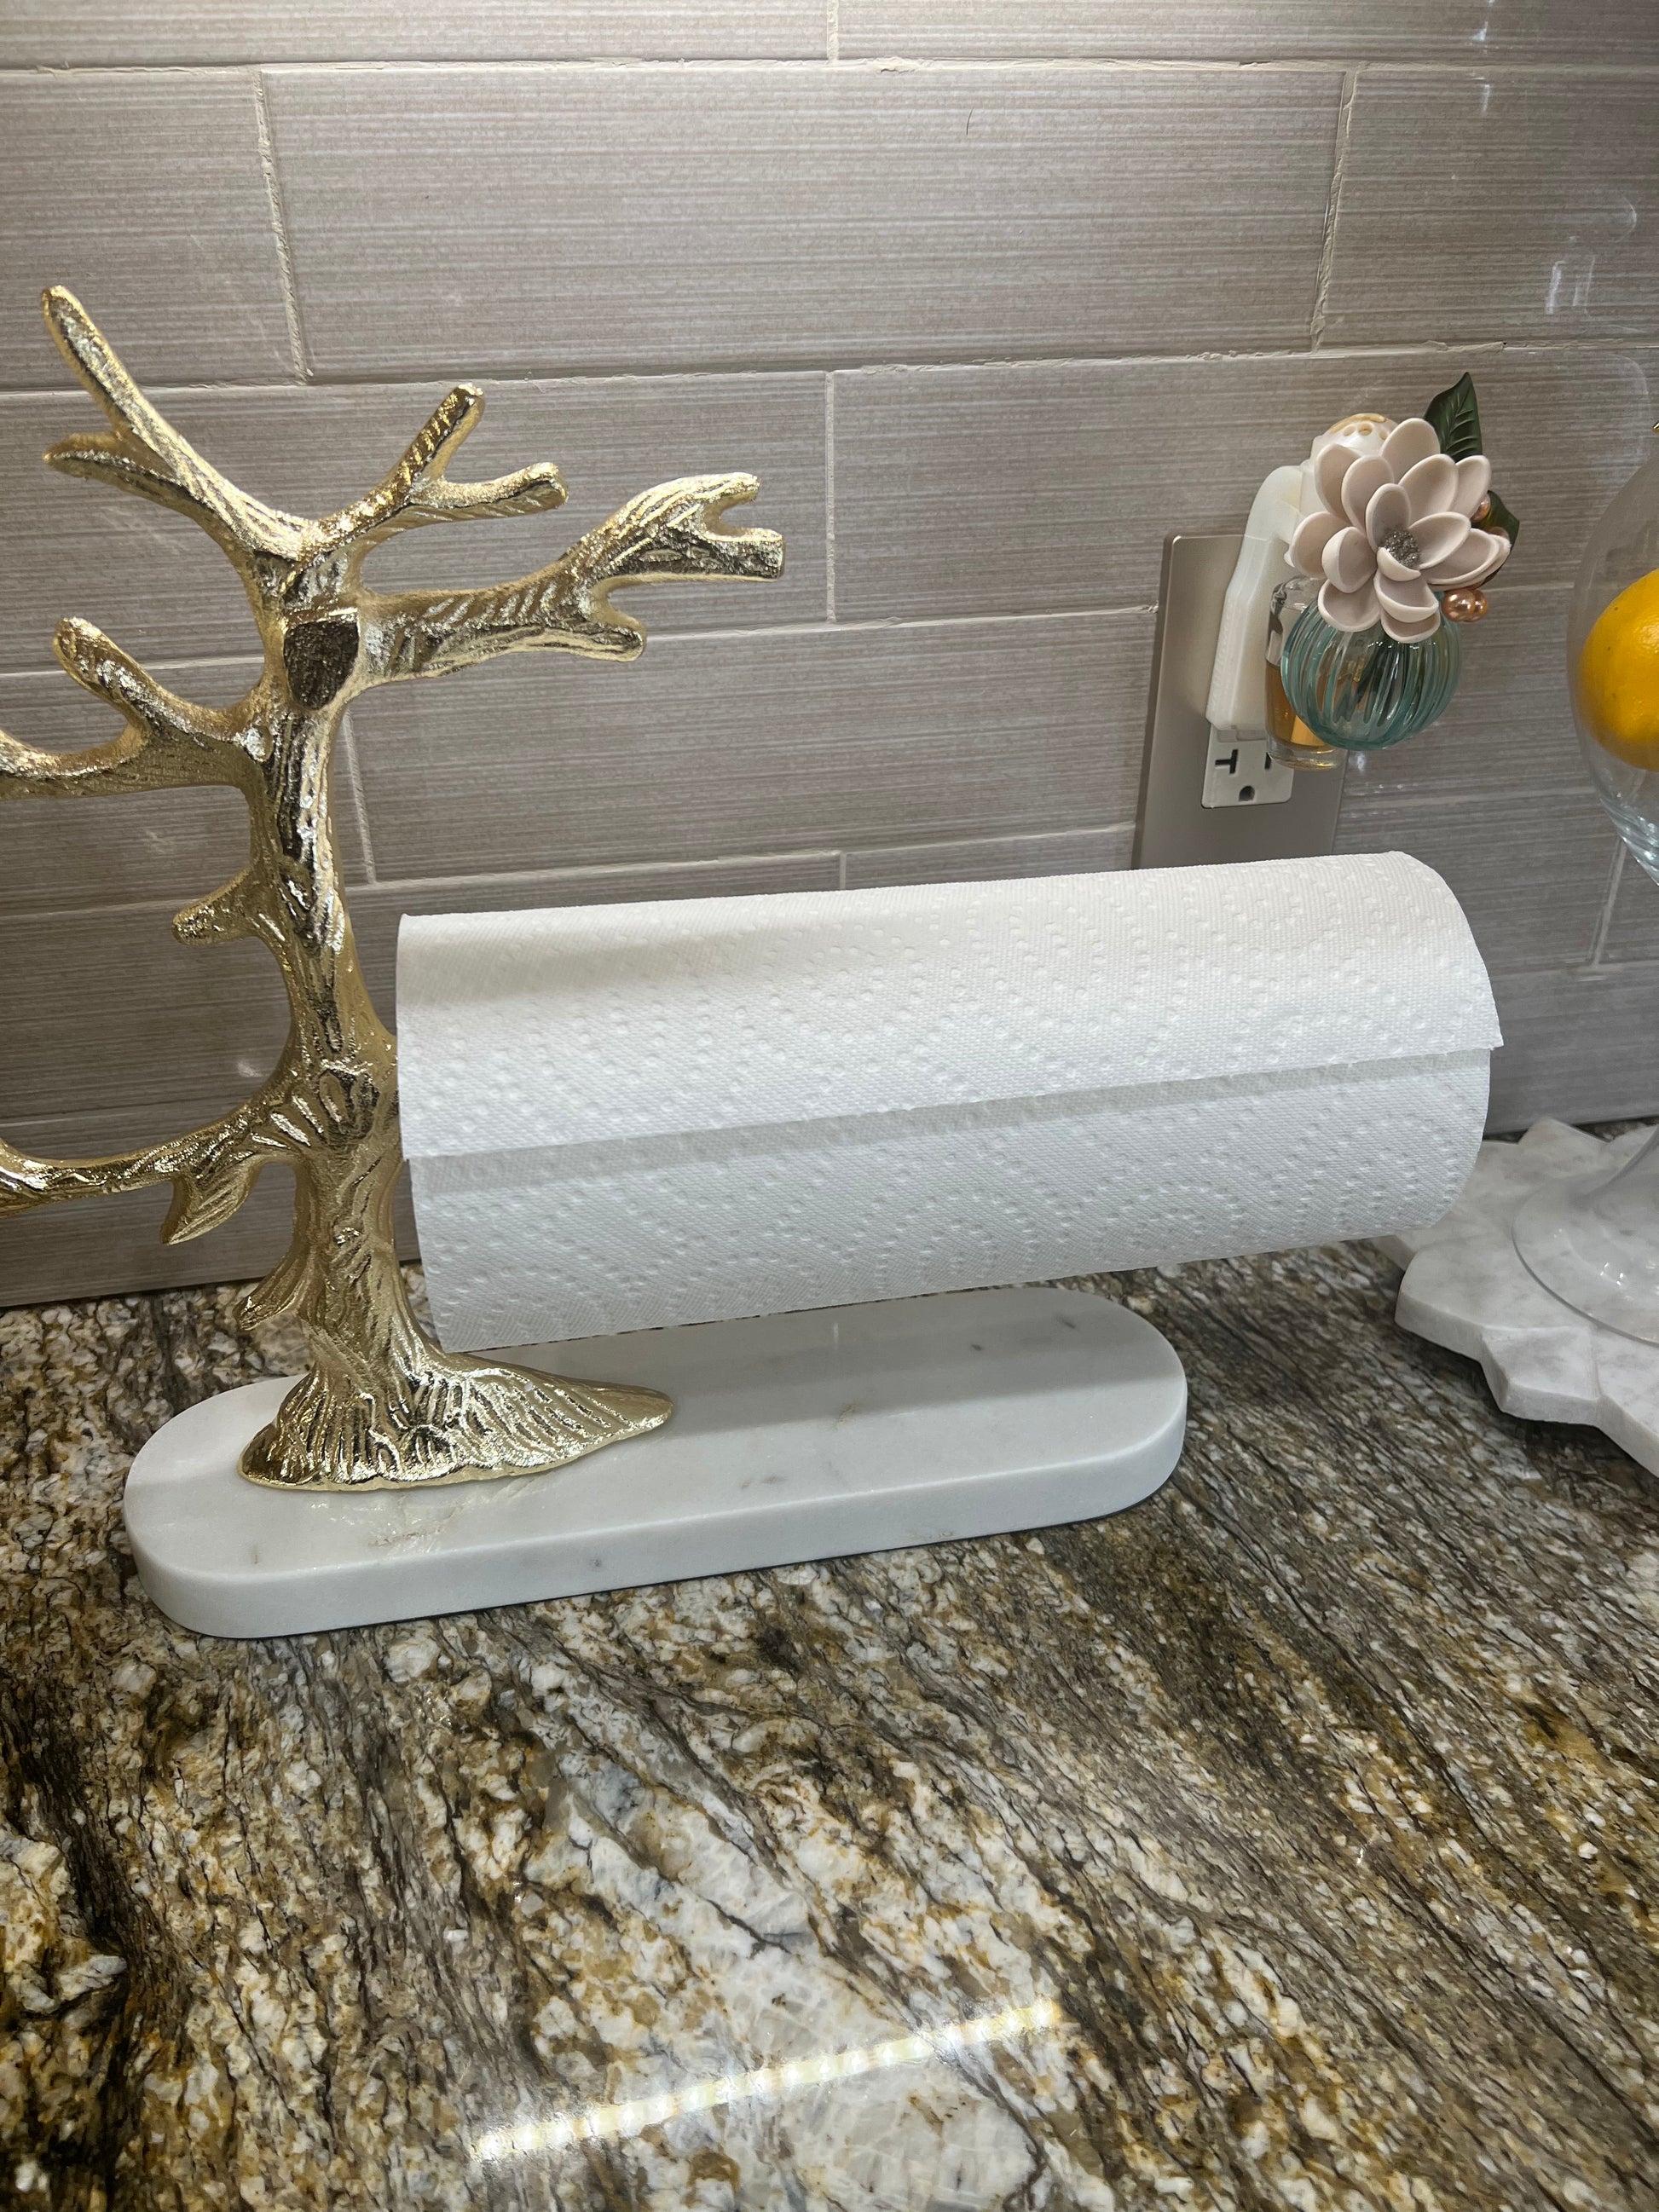 Kitchen Paper Towel Holder - Gold Tree Design with Marble Base – Turkish  Style US - Luxury Home Decor & Gifts